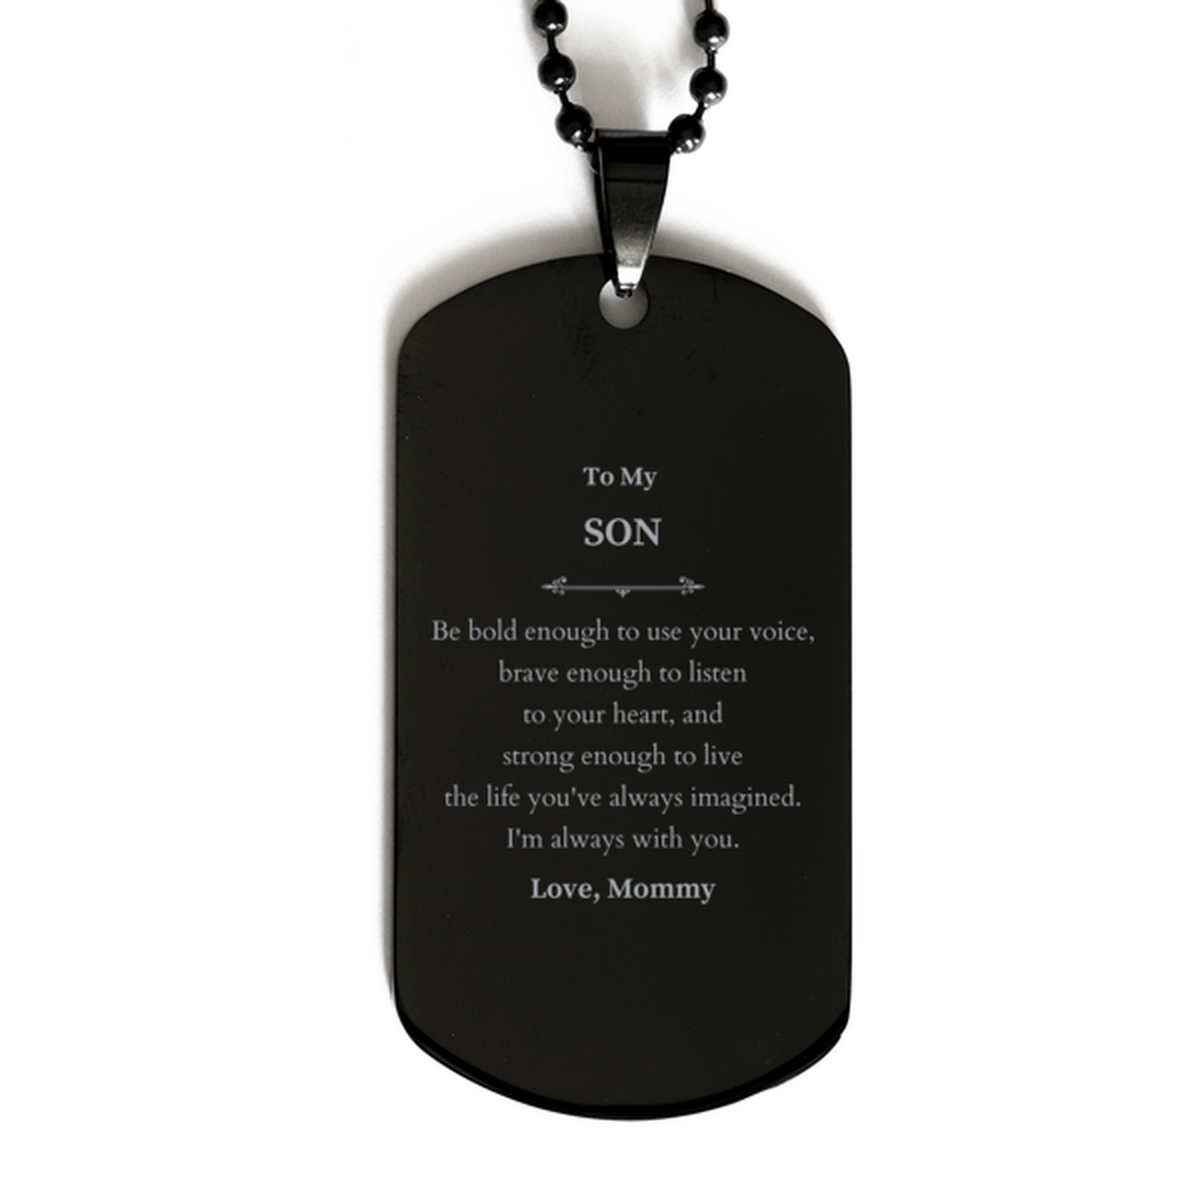 Keepsake Son Black Dog Tag Gift Idea Graduation Christmas Birthday Son from Mommy, Son Be bold enough to use your voice, brave enough to listen to your heart. Love, Mommy